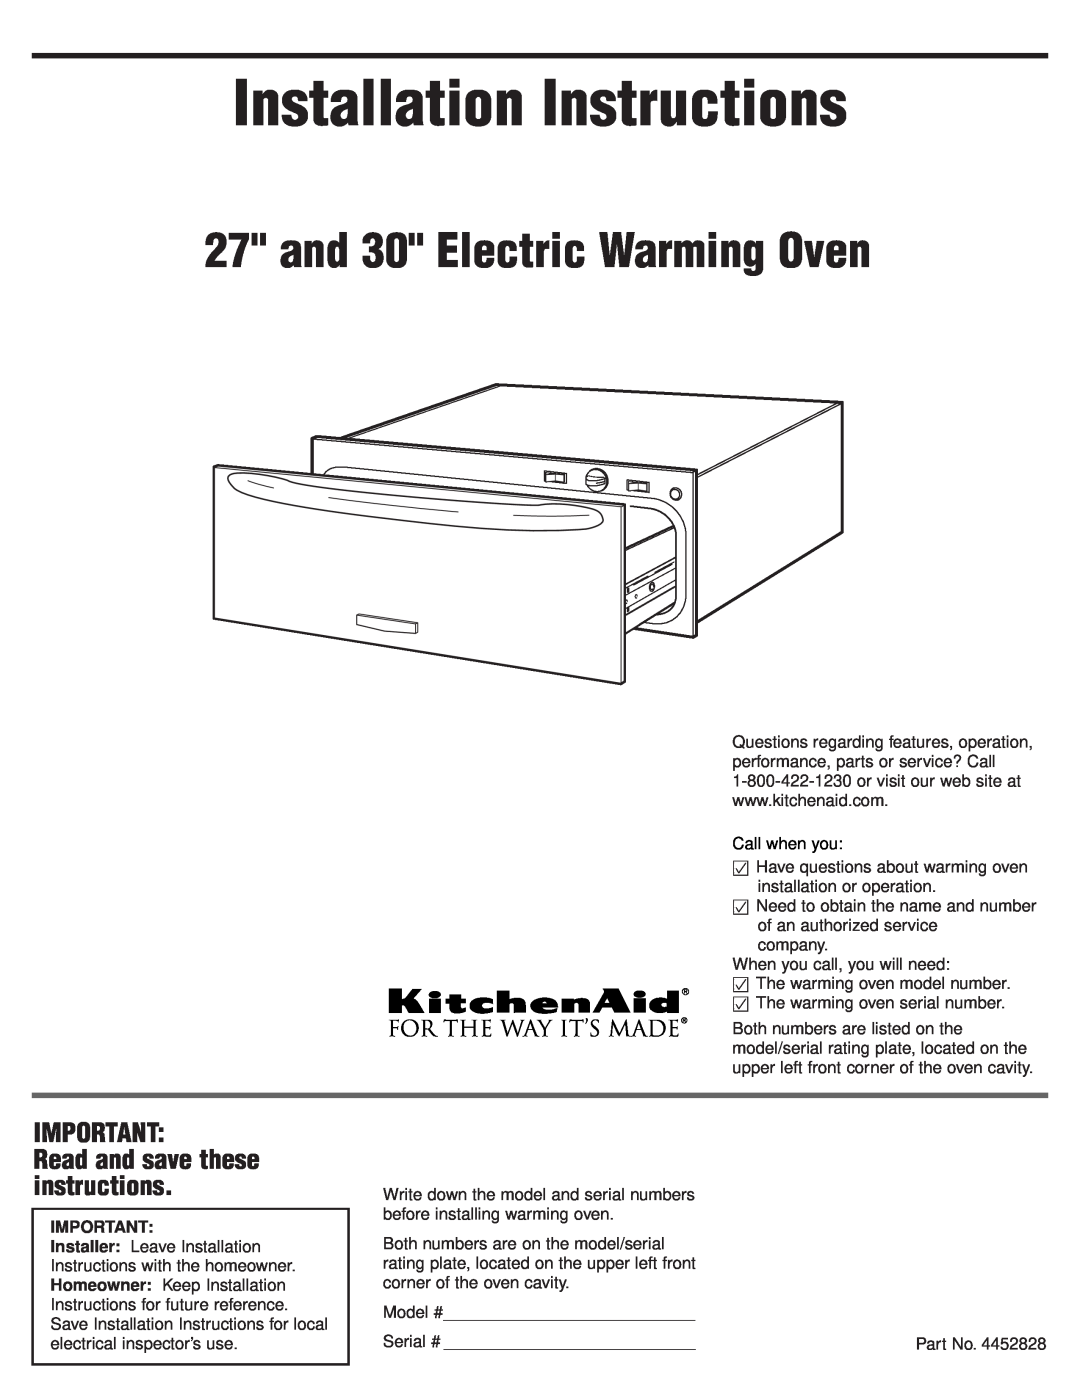 KitchenAid 4452828 installation instructions Installation Instructions, and 30 Electric Warming Oven 